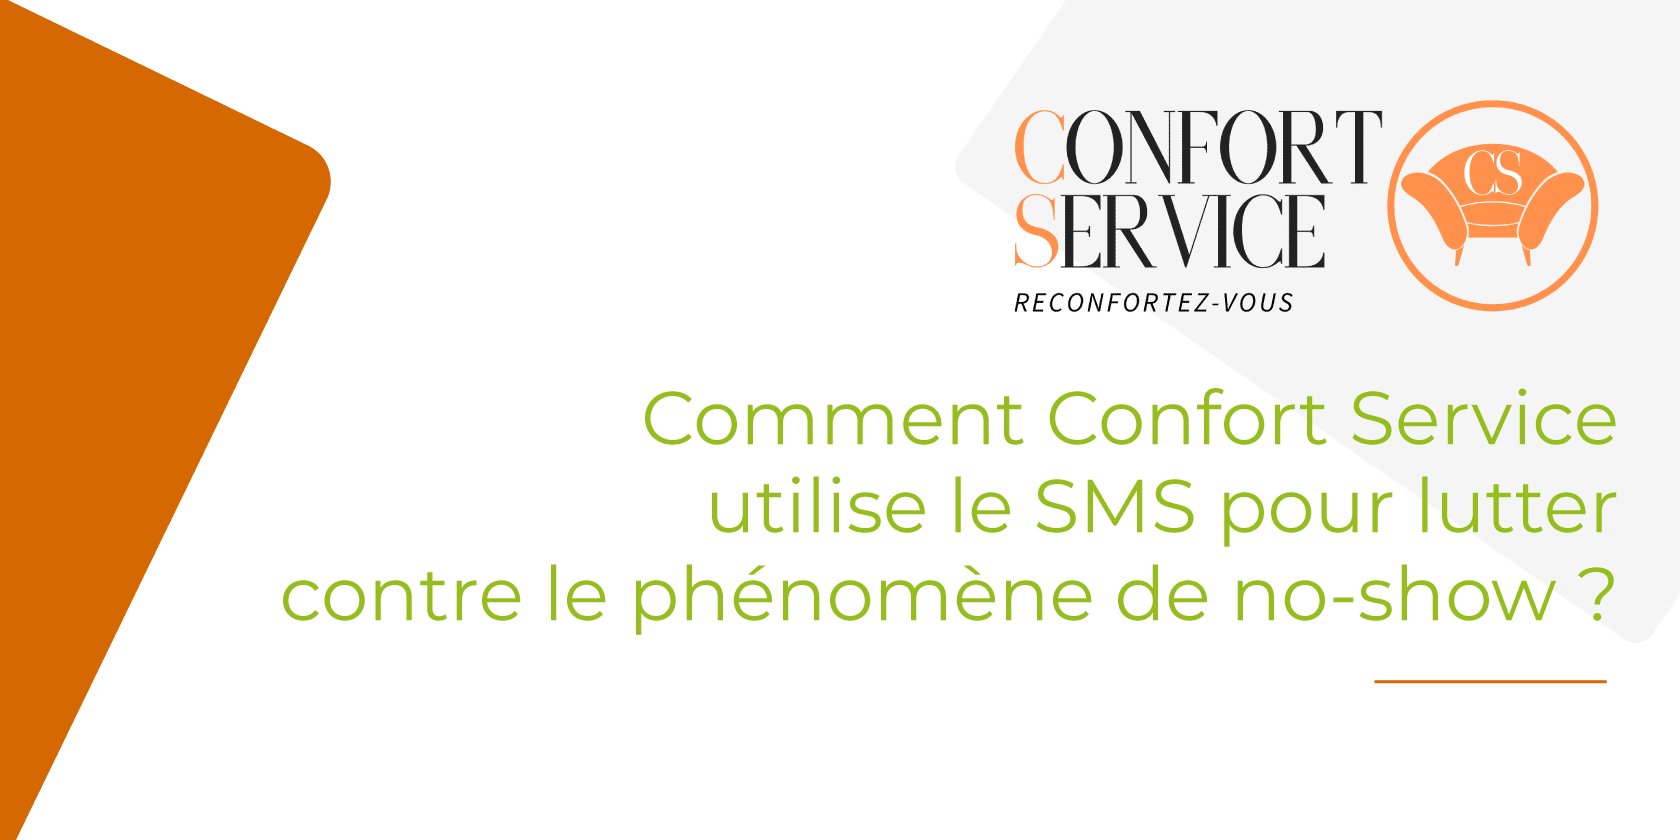 campagne sms confort service